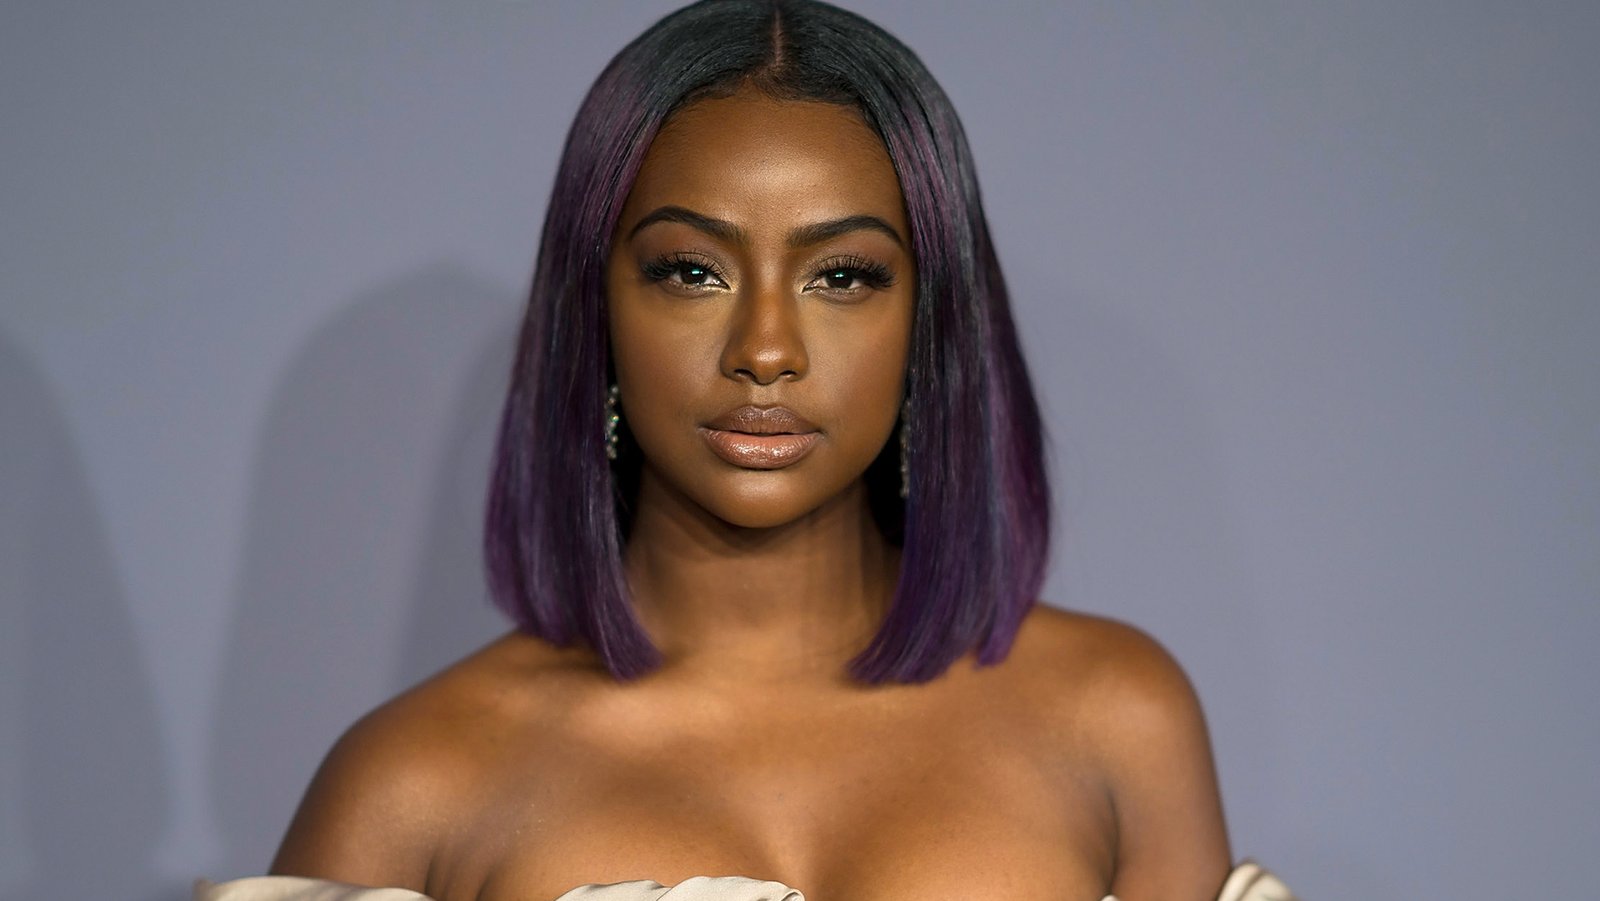 US vocalist, Justine Skye's Ancestry DNA results uncover she's 43% Nigerian